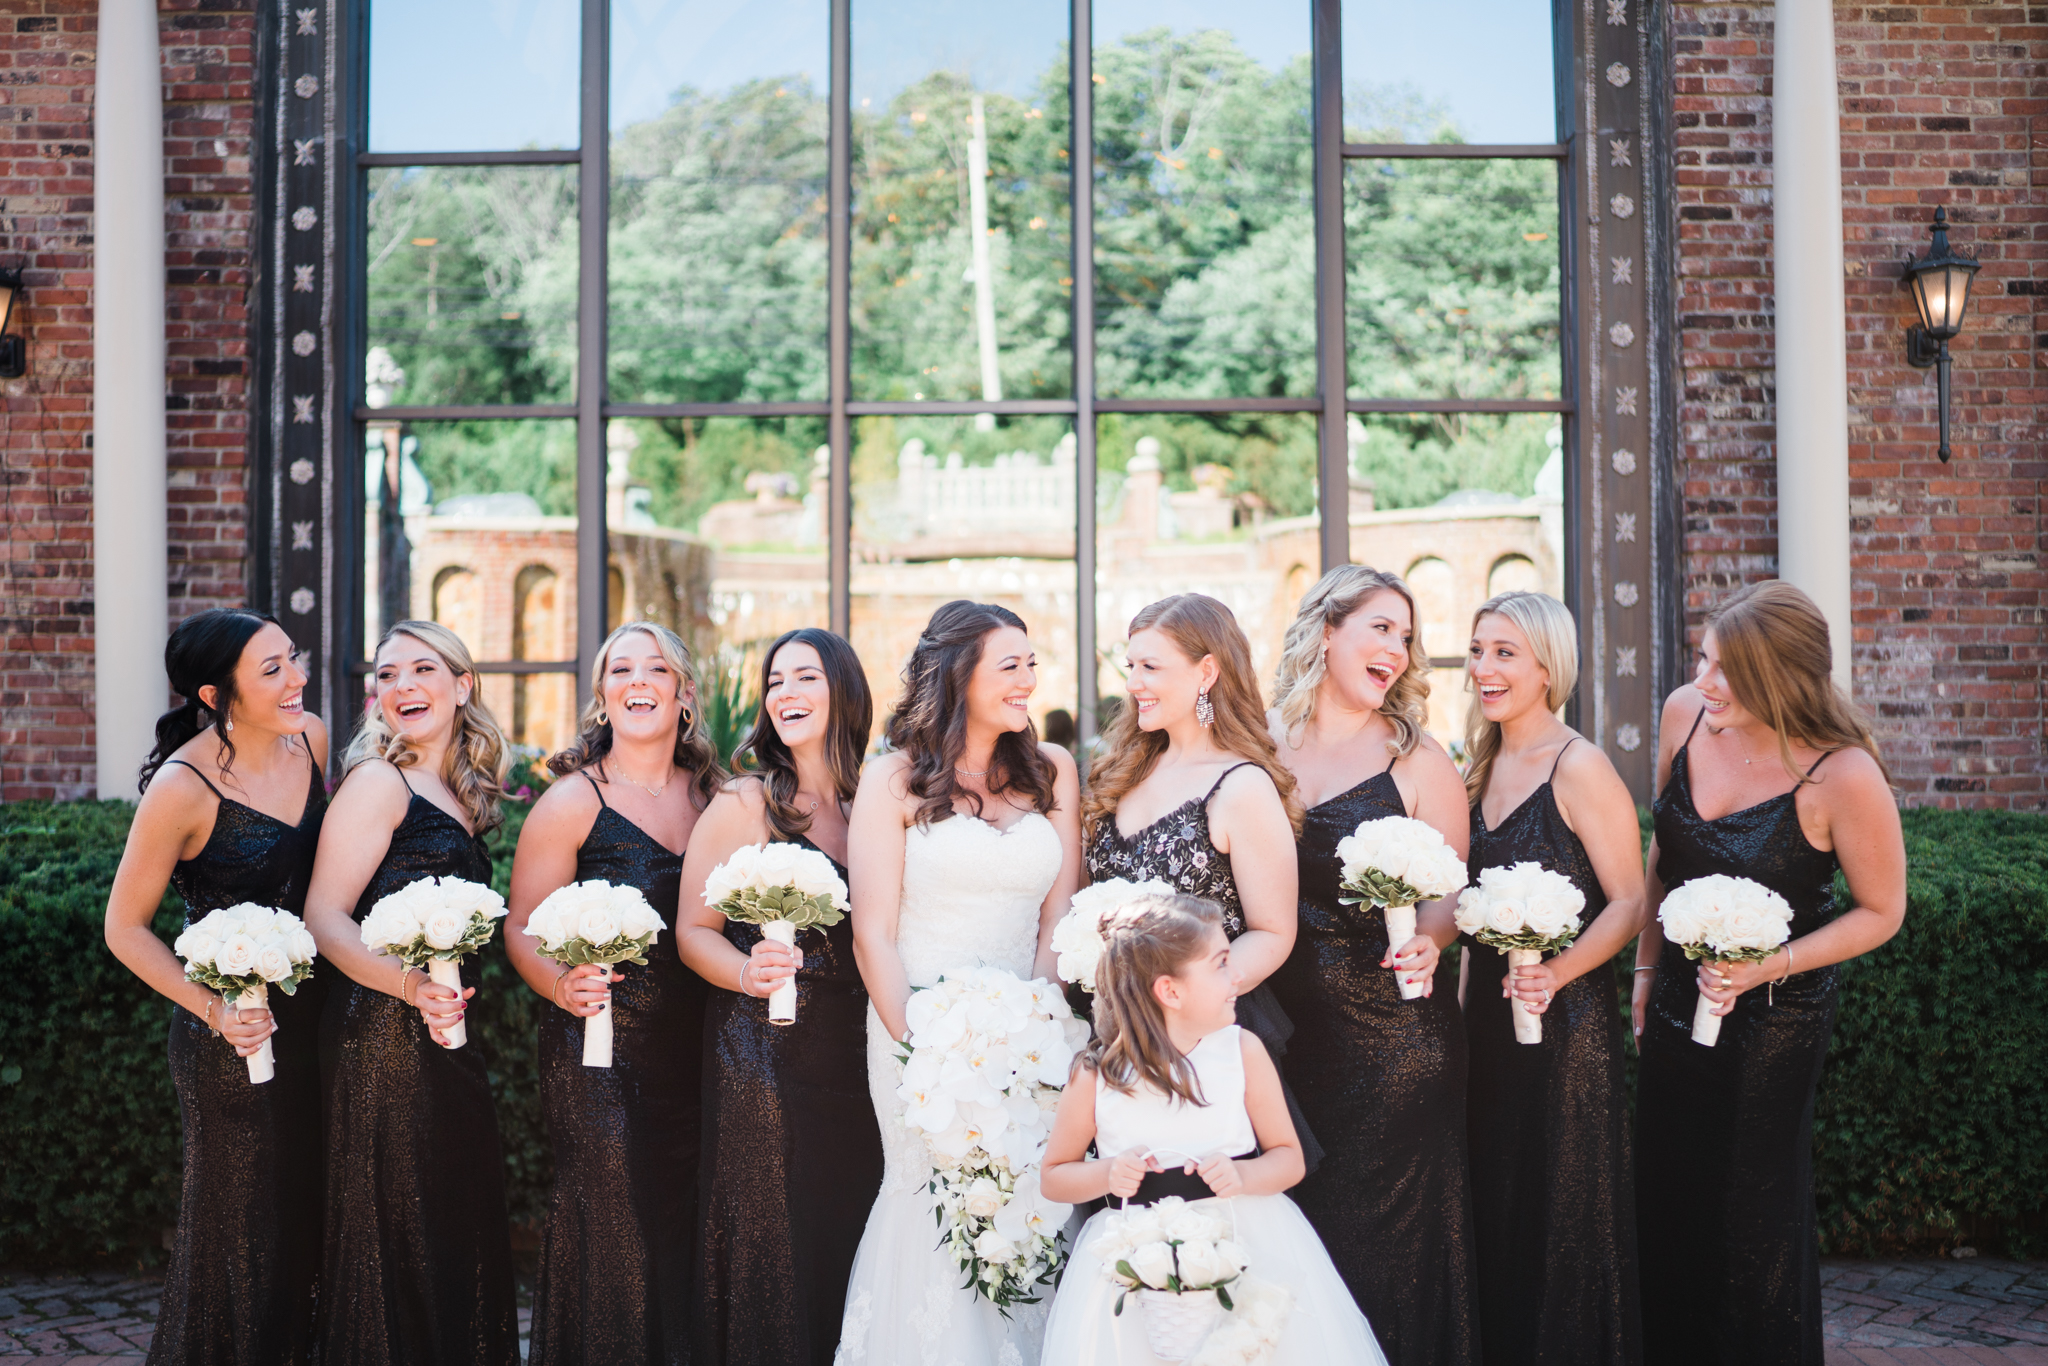 Bridesmaids laughing togther